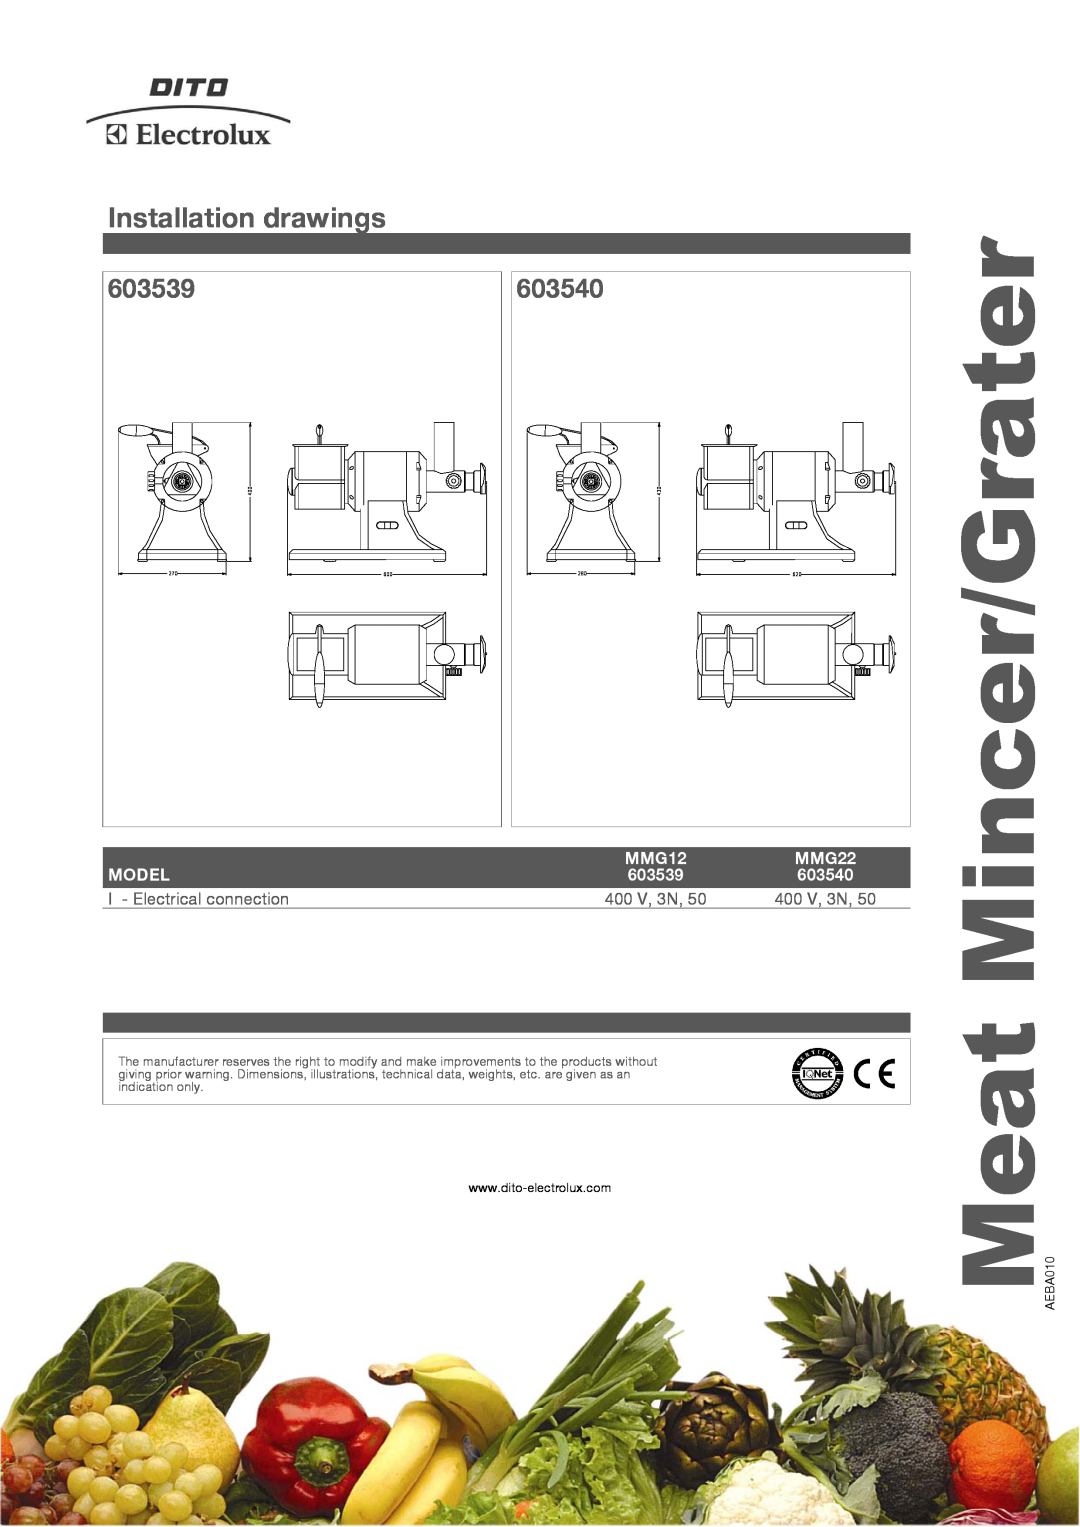 Electrolux 603539 manual Installation drawings, 603540, MMG12, MMG22, Model, I - Electrical connection, 400 V, 3N, 430 620 